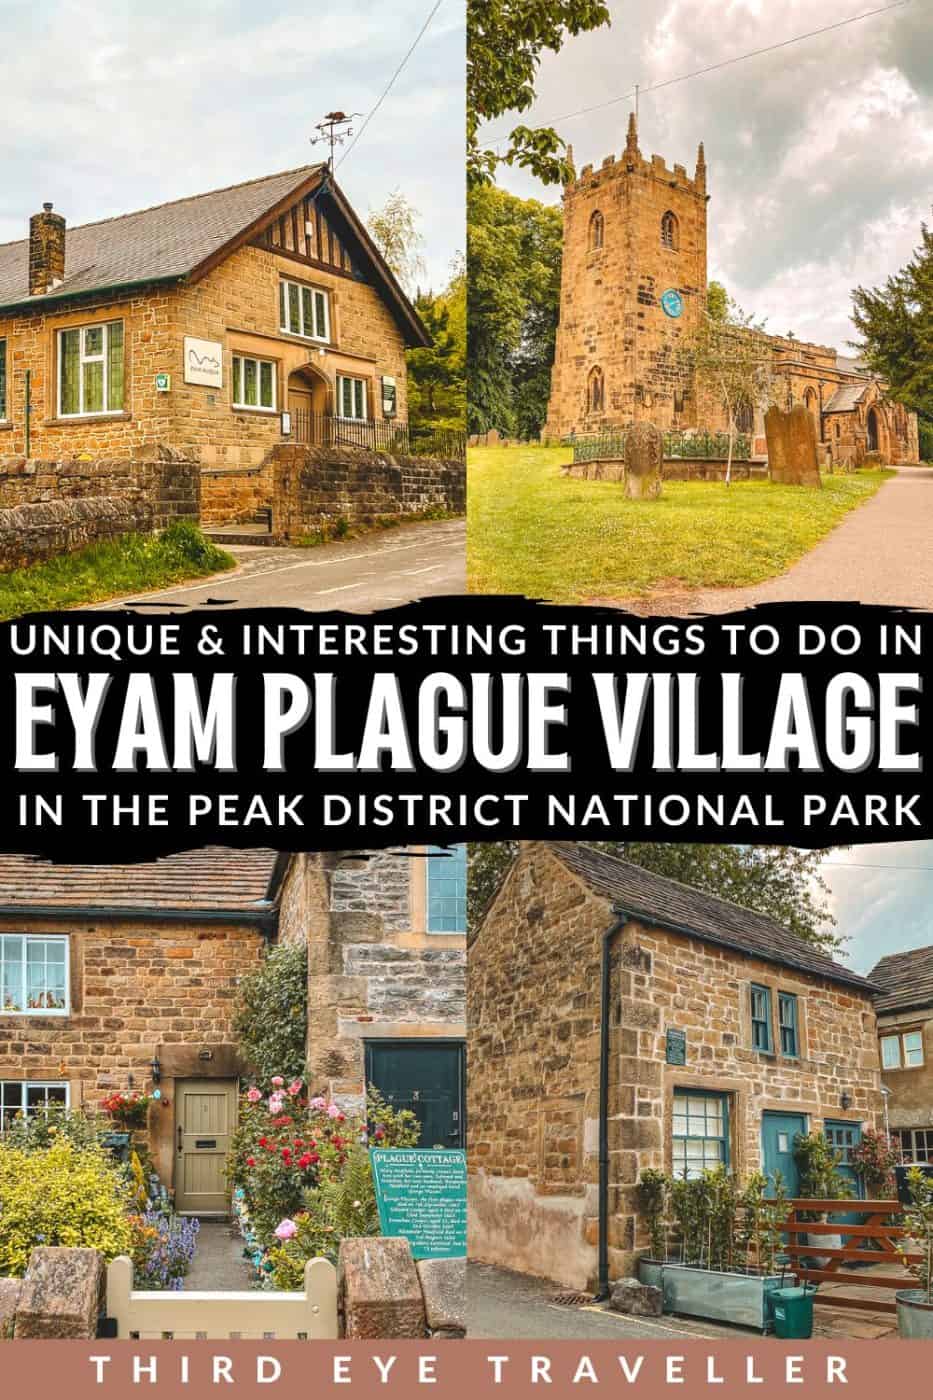 Things to do in Eyam Plague Village Peak District National Park
